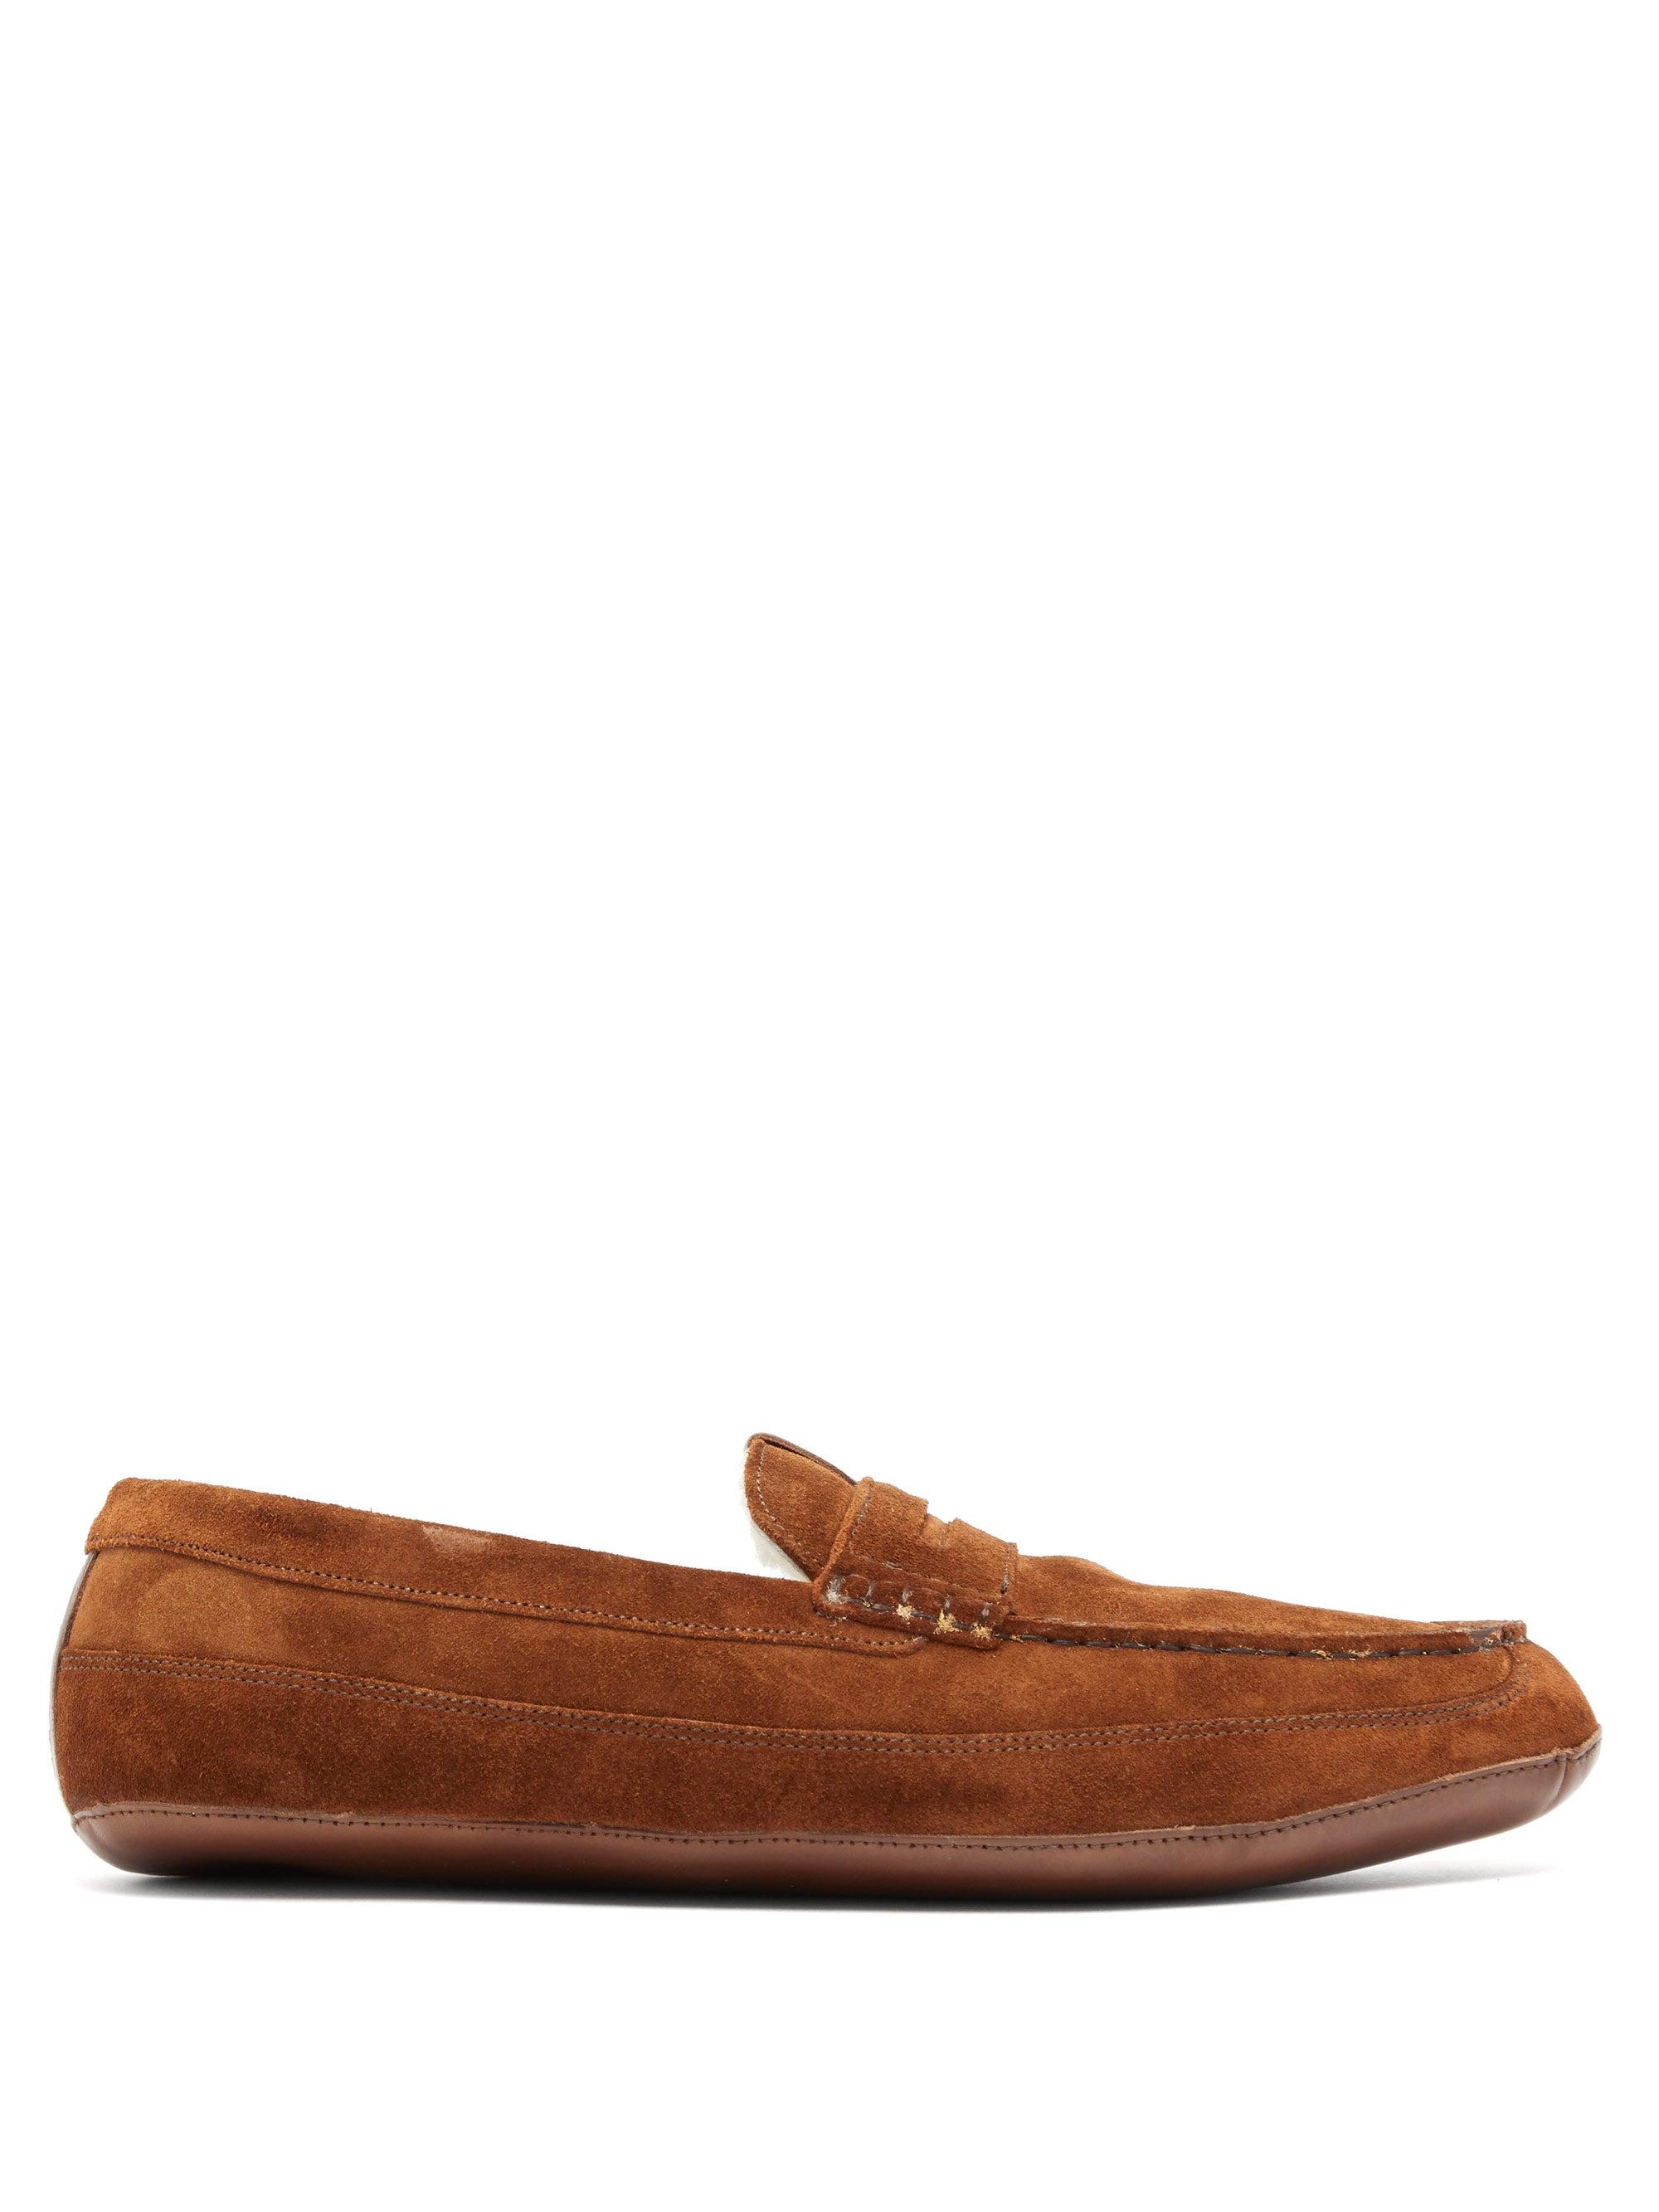 Grenson Sly Suede Penny Slippers in Brown for Men - Lyst